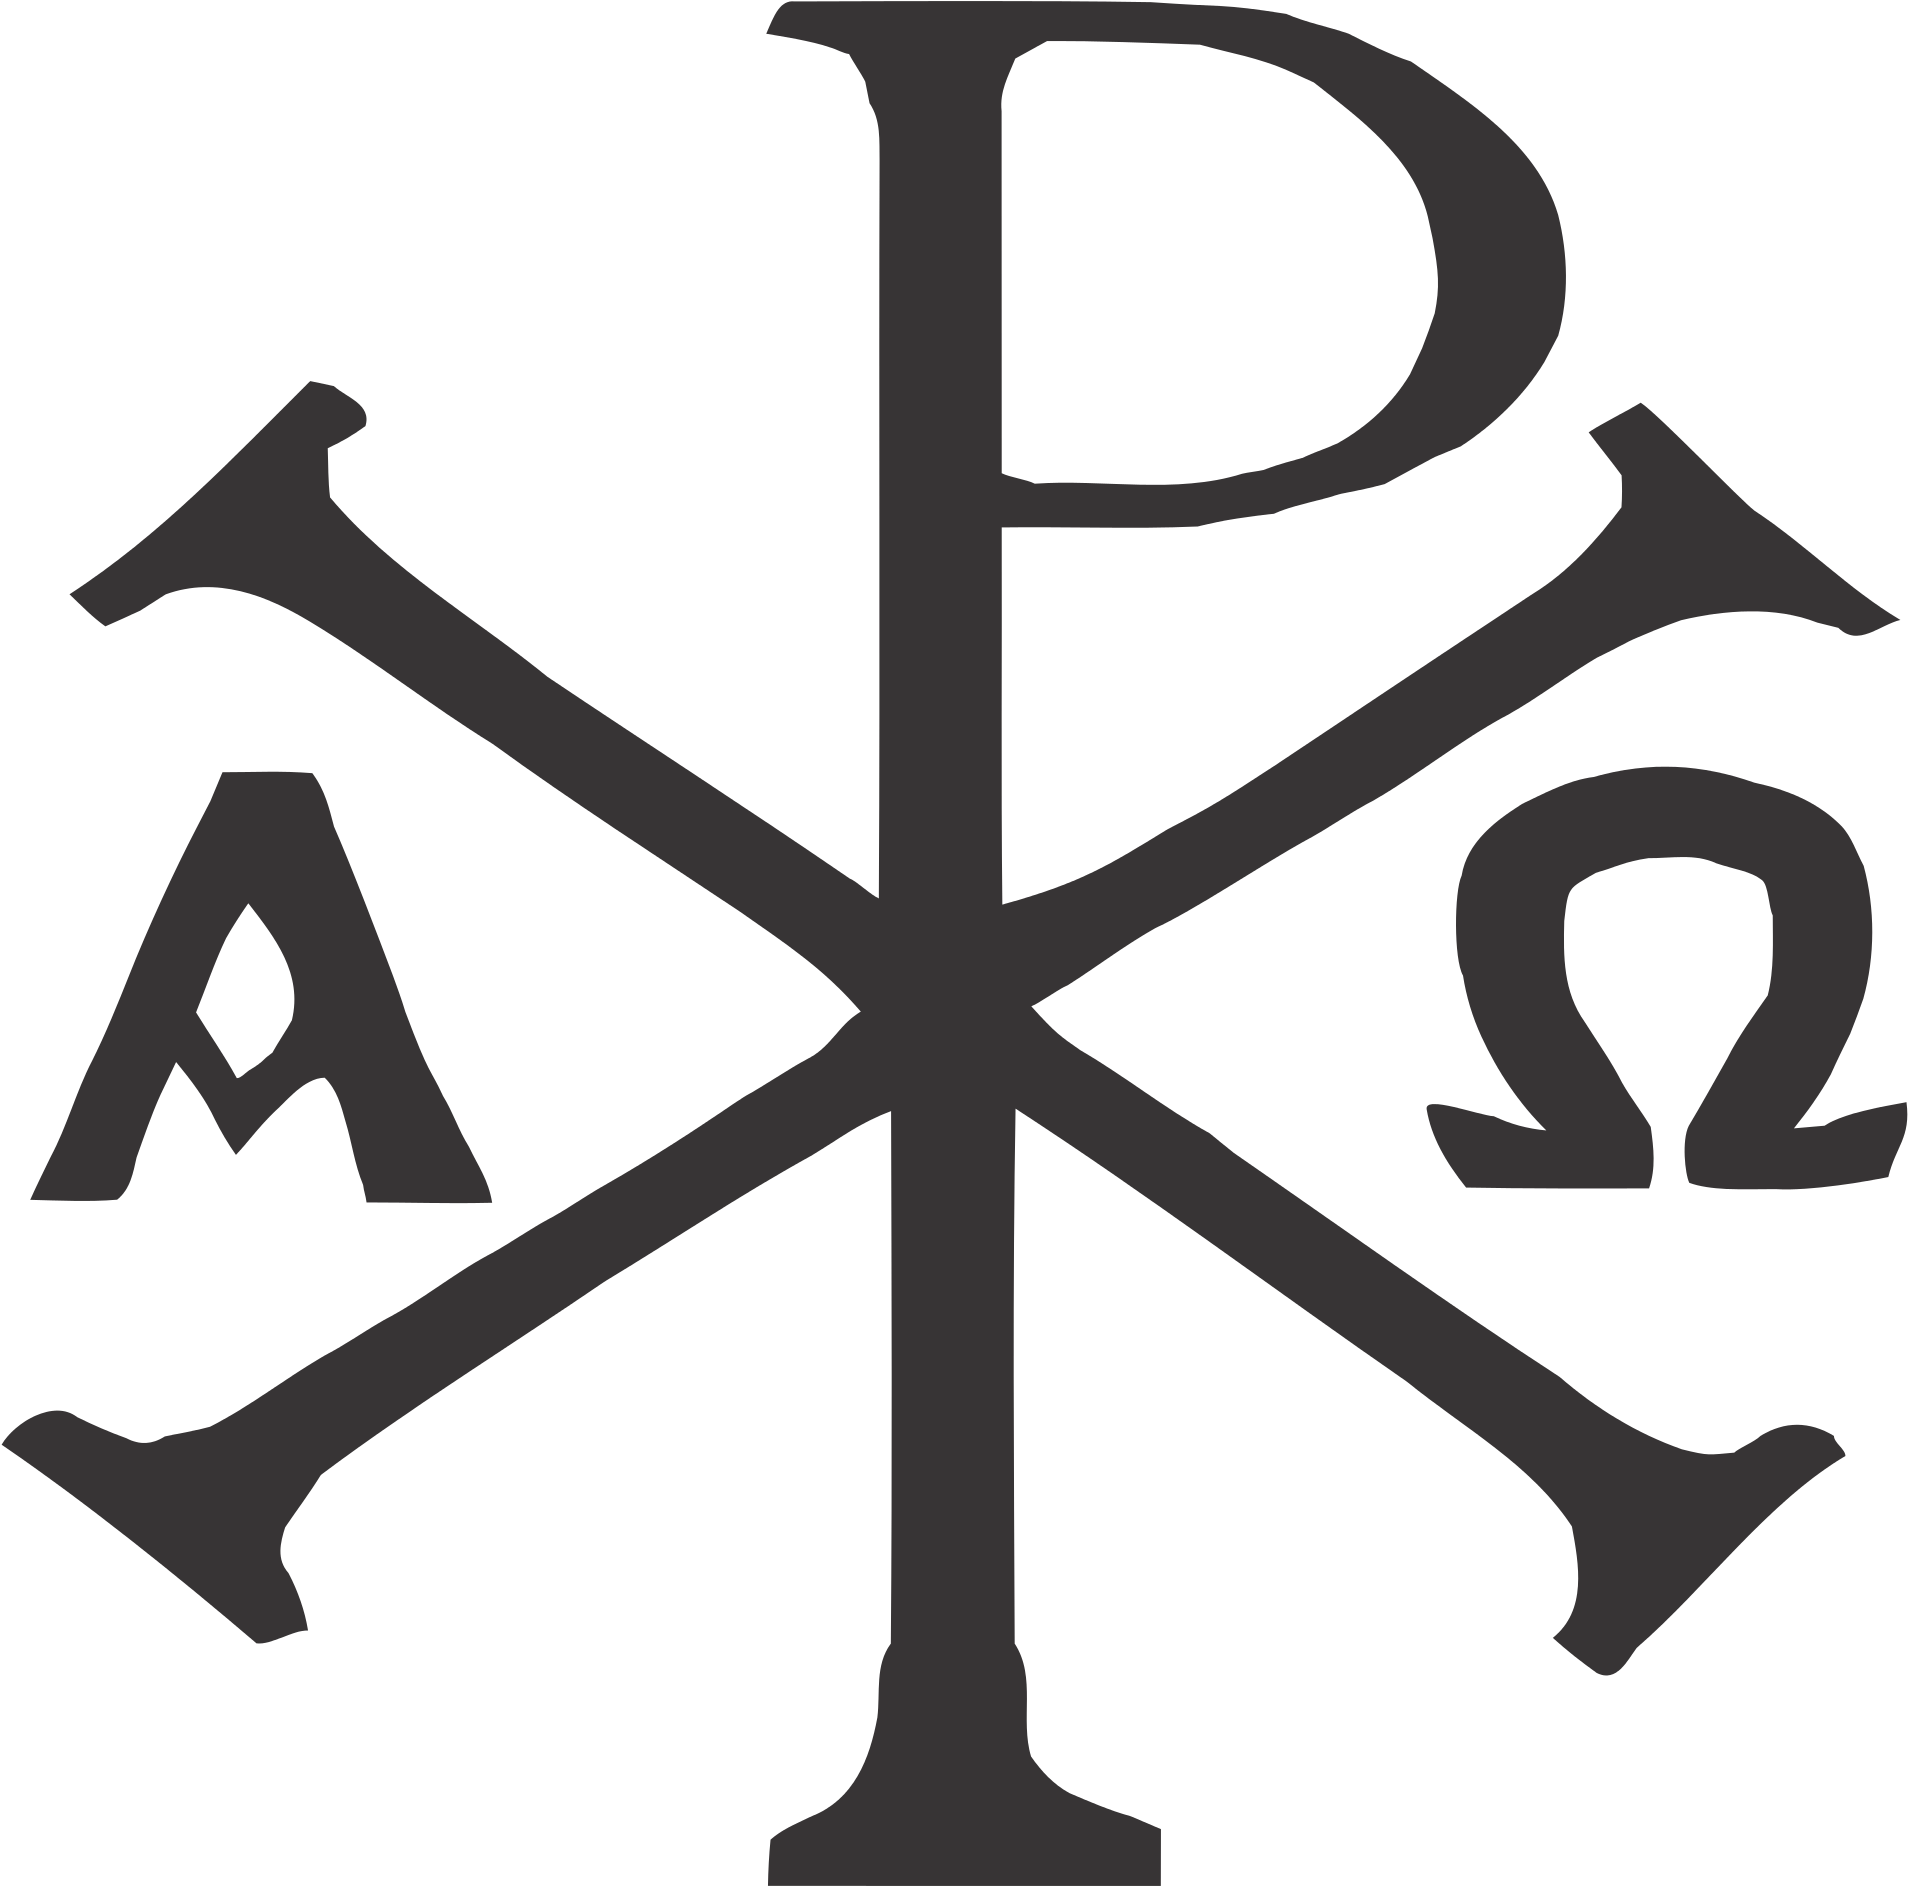 Download Chi Rho Alpha Omega Alpha Omega Tattoo Chi Rho Chi Rho Png Image With No Background Pngkey Com